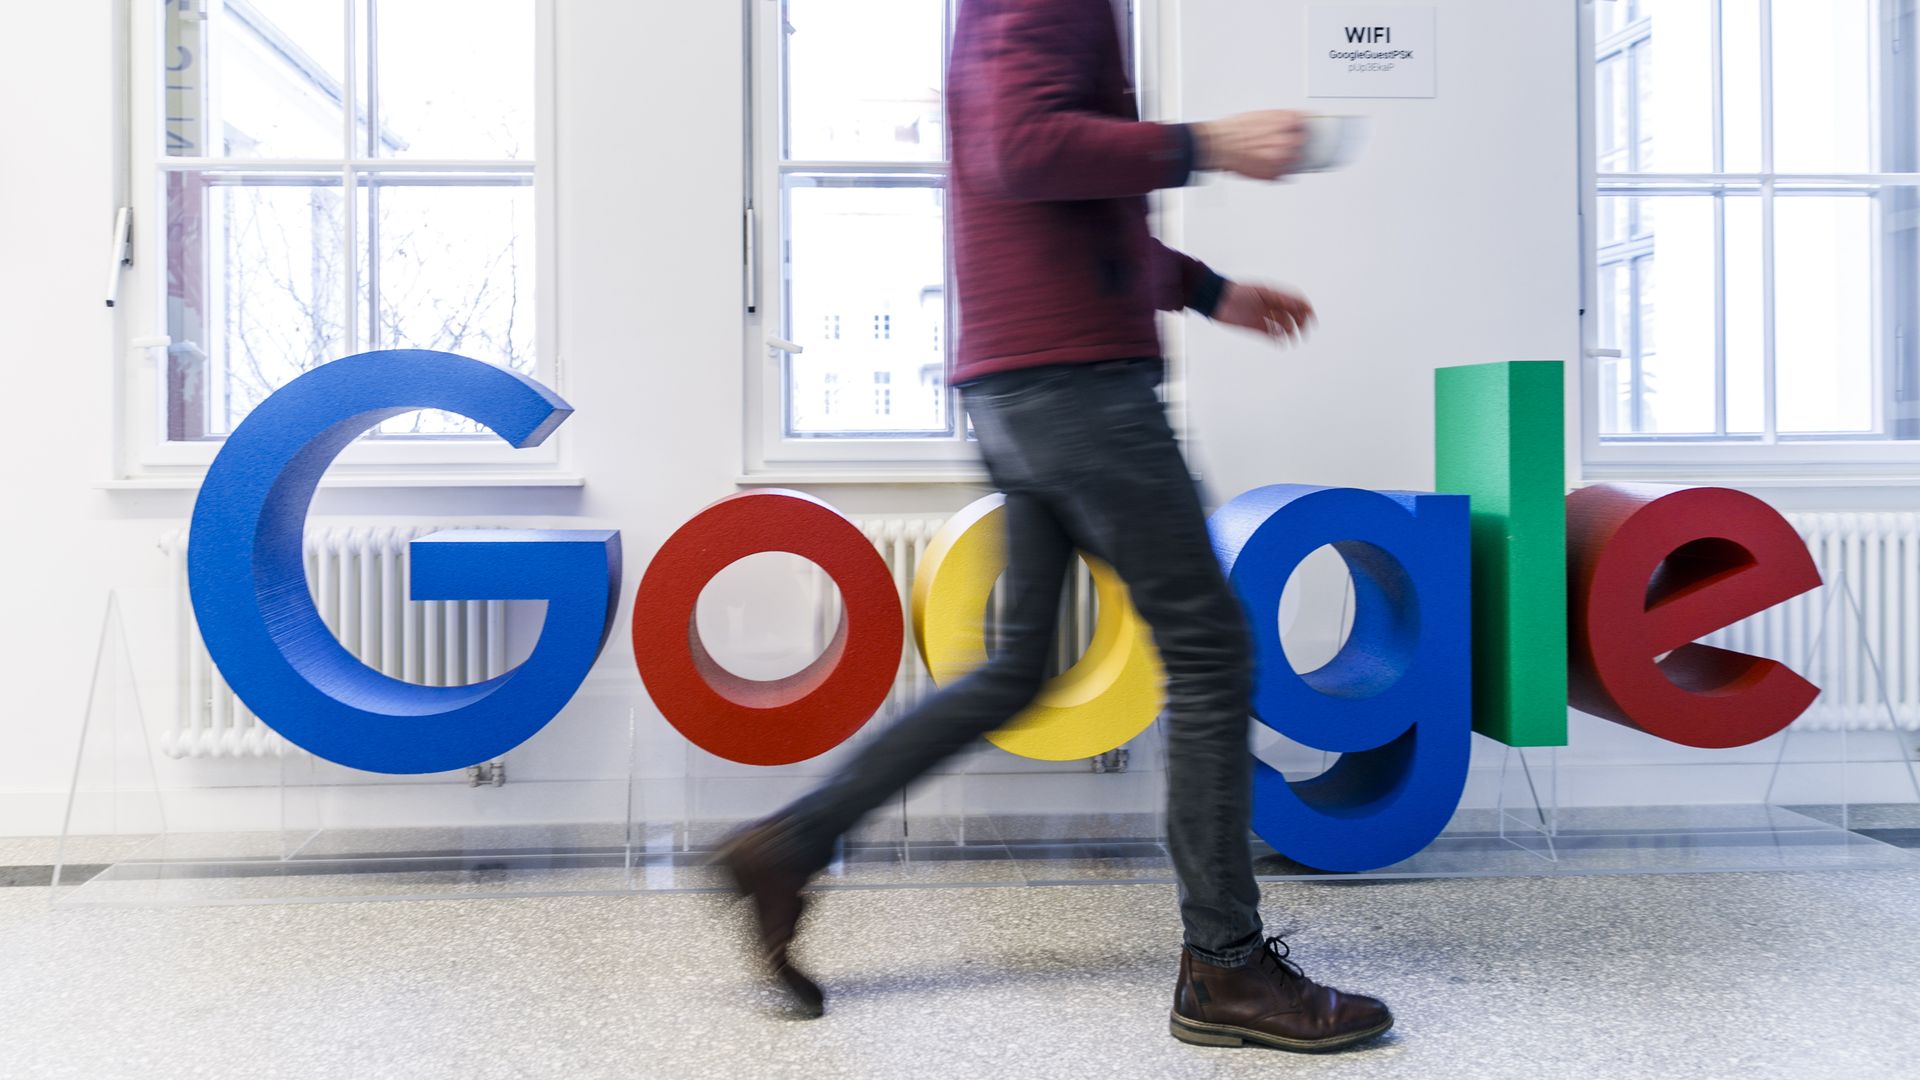 Google logo with man walking in front of it